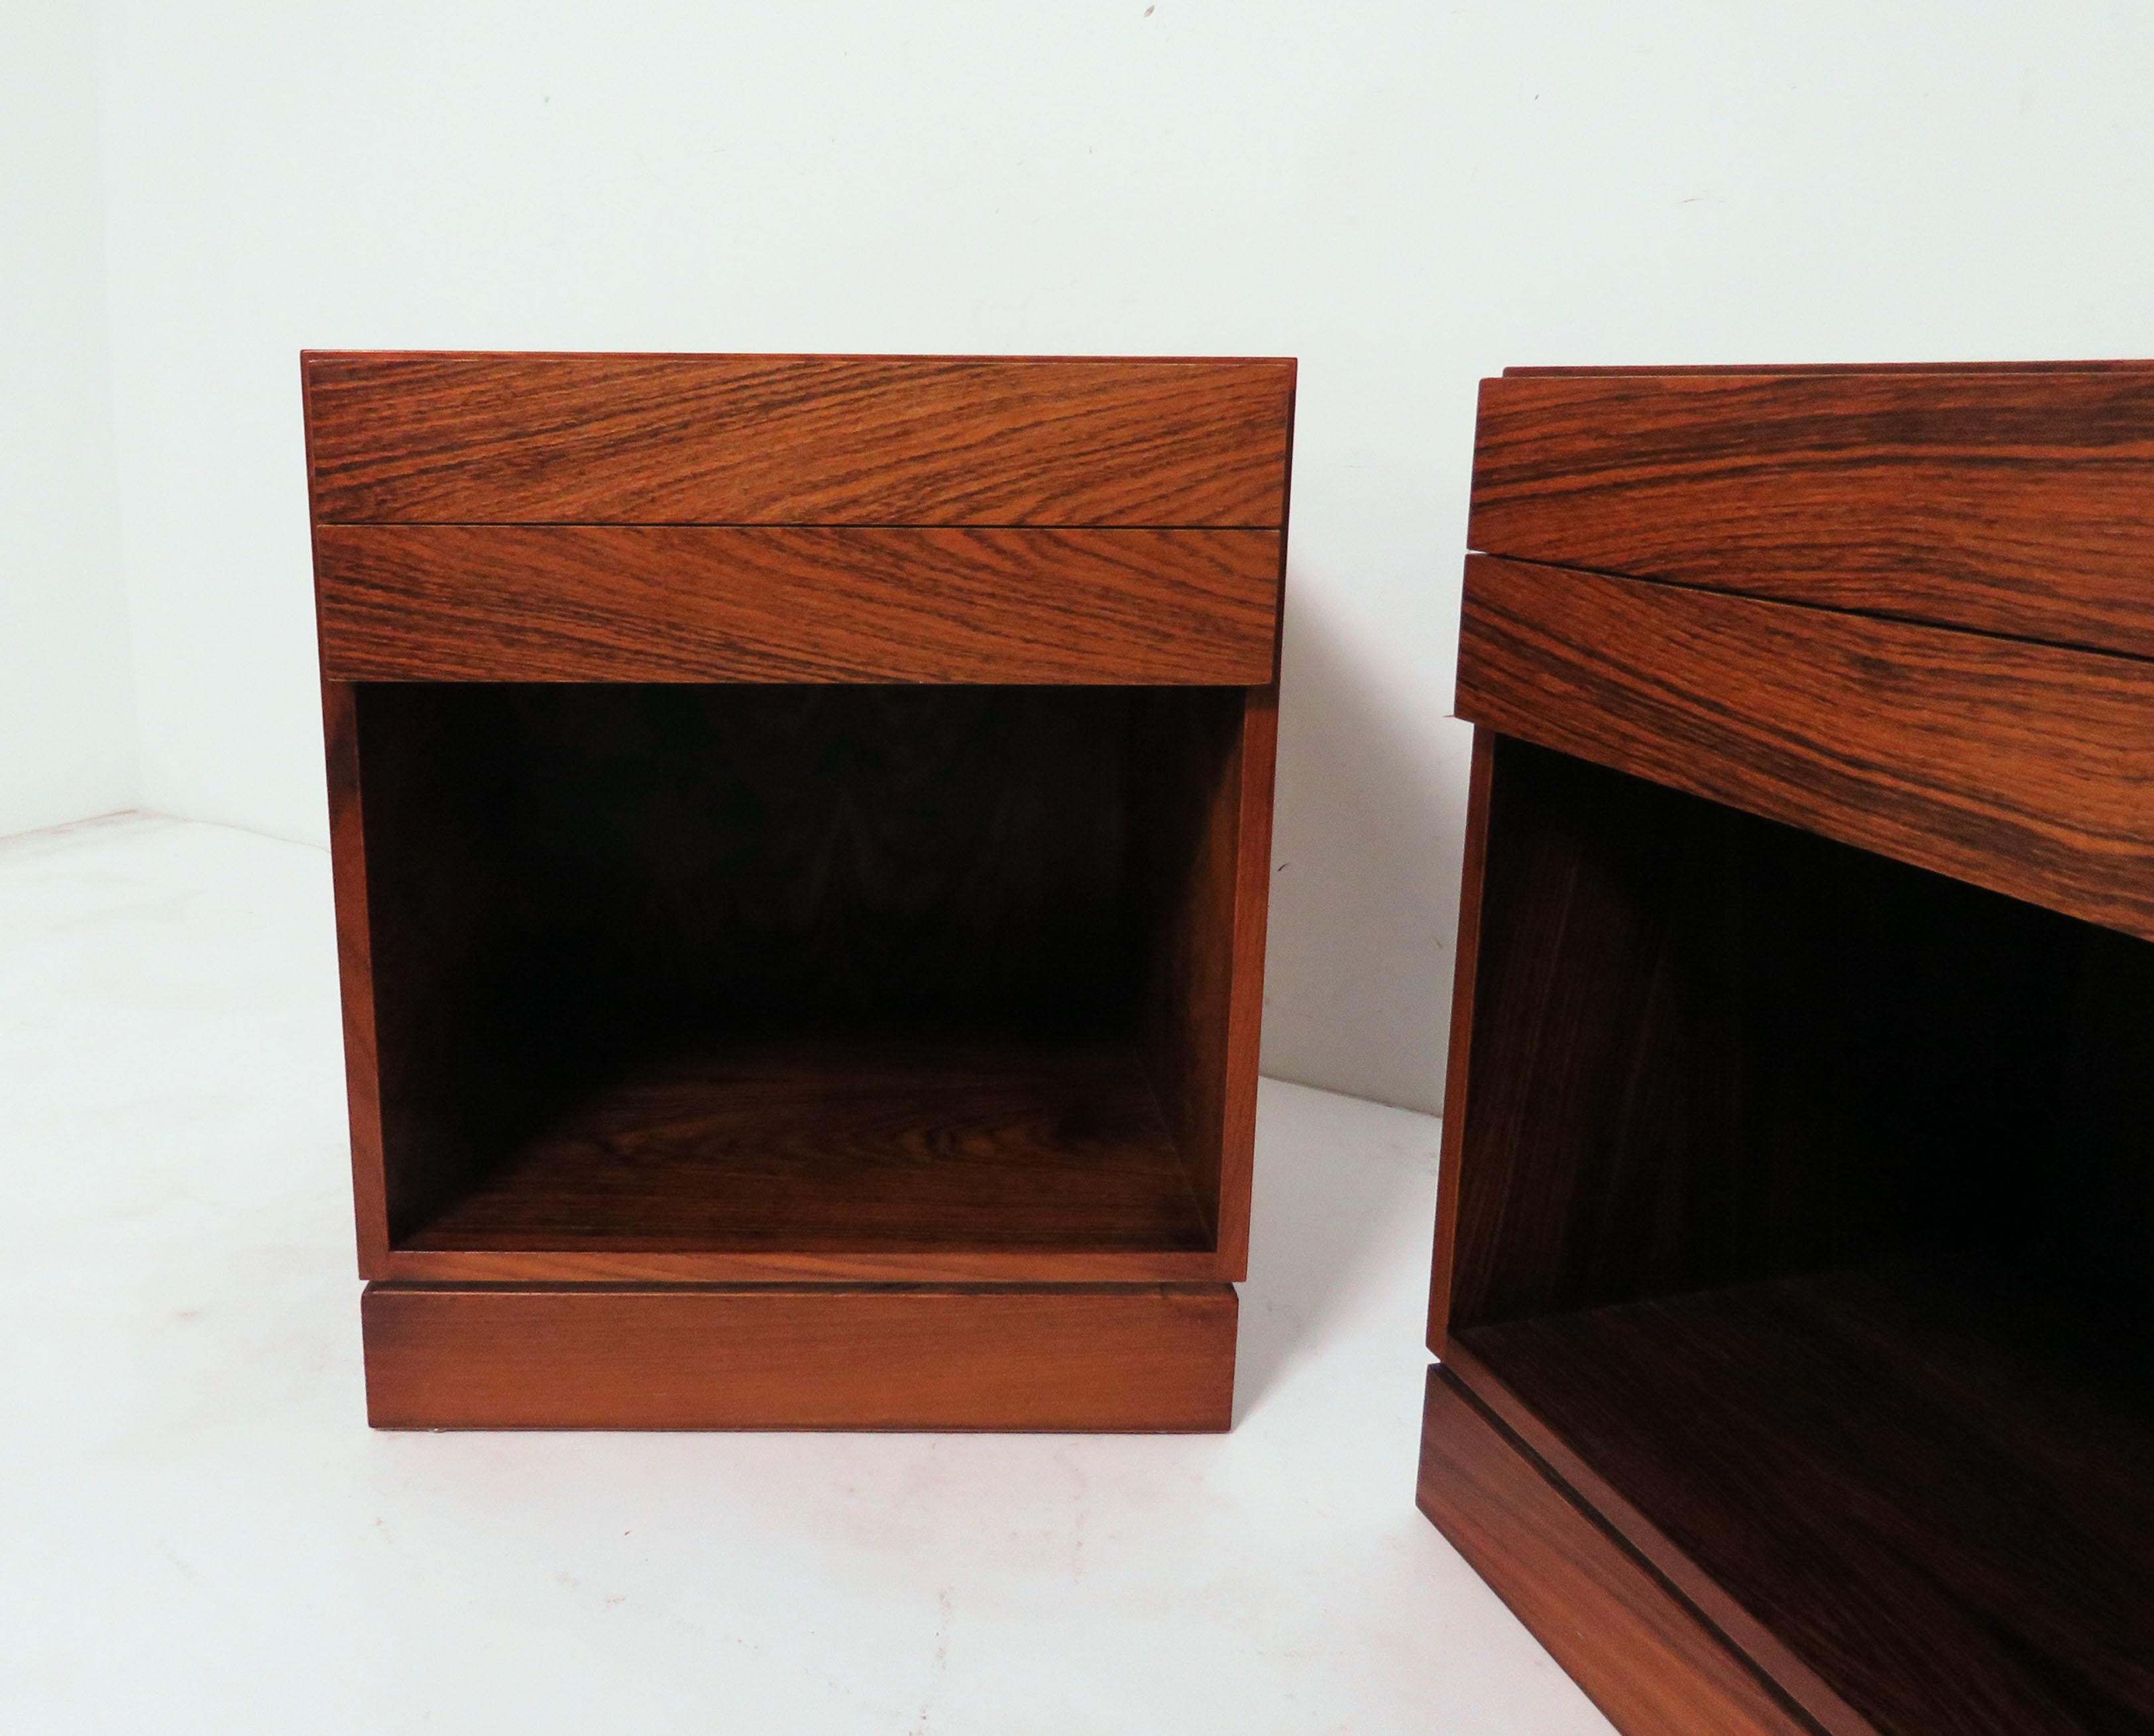 Pair of rosewood nightstands with two drawers by Arne Iversen Wahl for Vinde Mobelfabrik, circa 1970s.